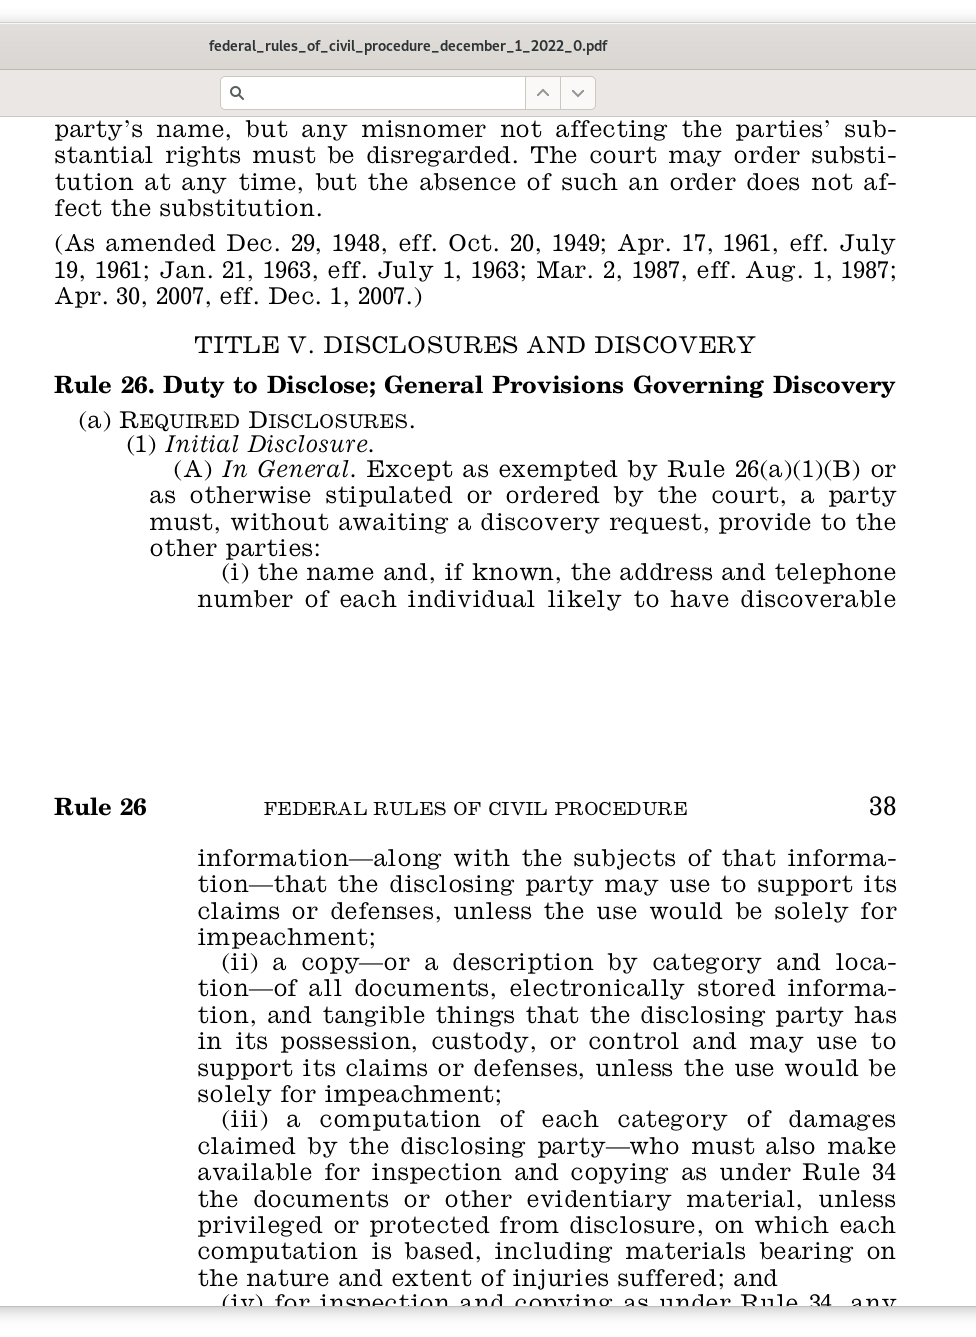 Federal rules of civil procedure, rule 26, discovery